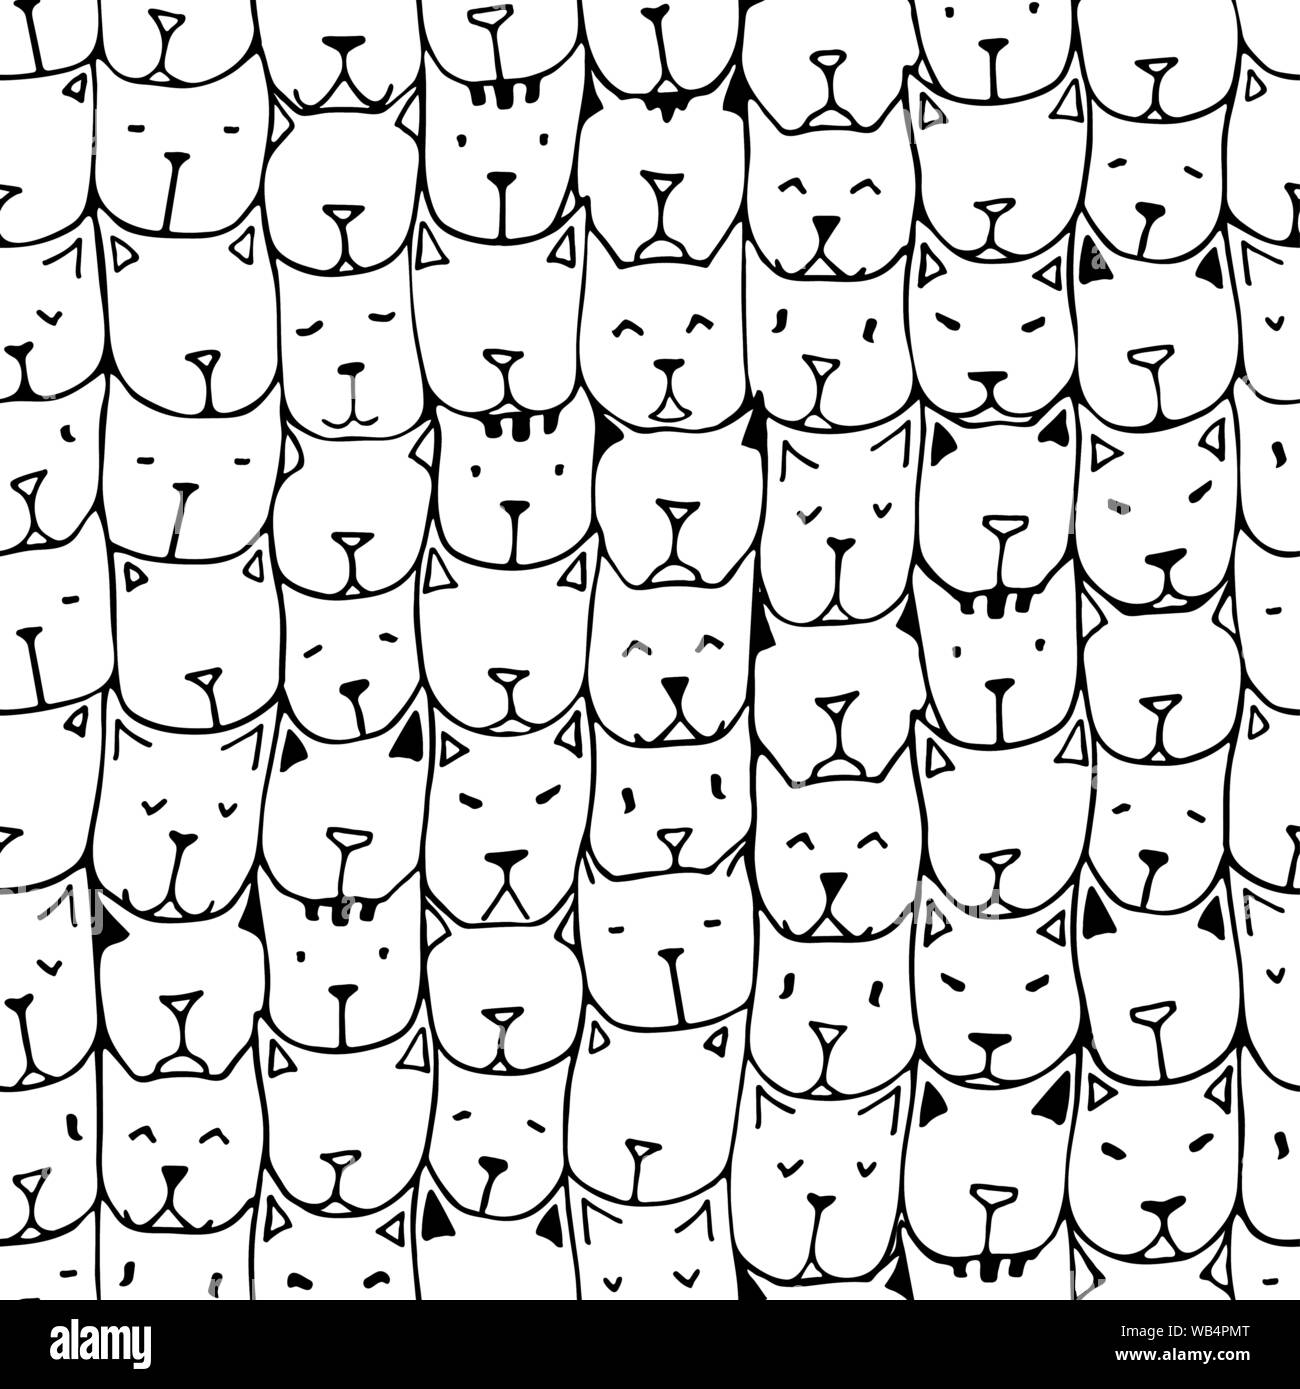 Seamles patterns with cute hand drawn cats. Vintage vector illustration. Doodle art. Background with cat faces. Adult coloring pages. Zentangle coloring book. Stock Vector